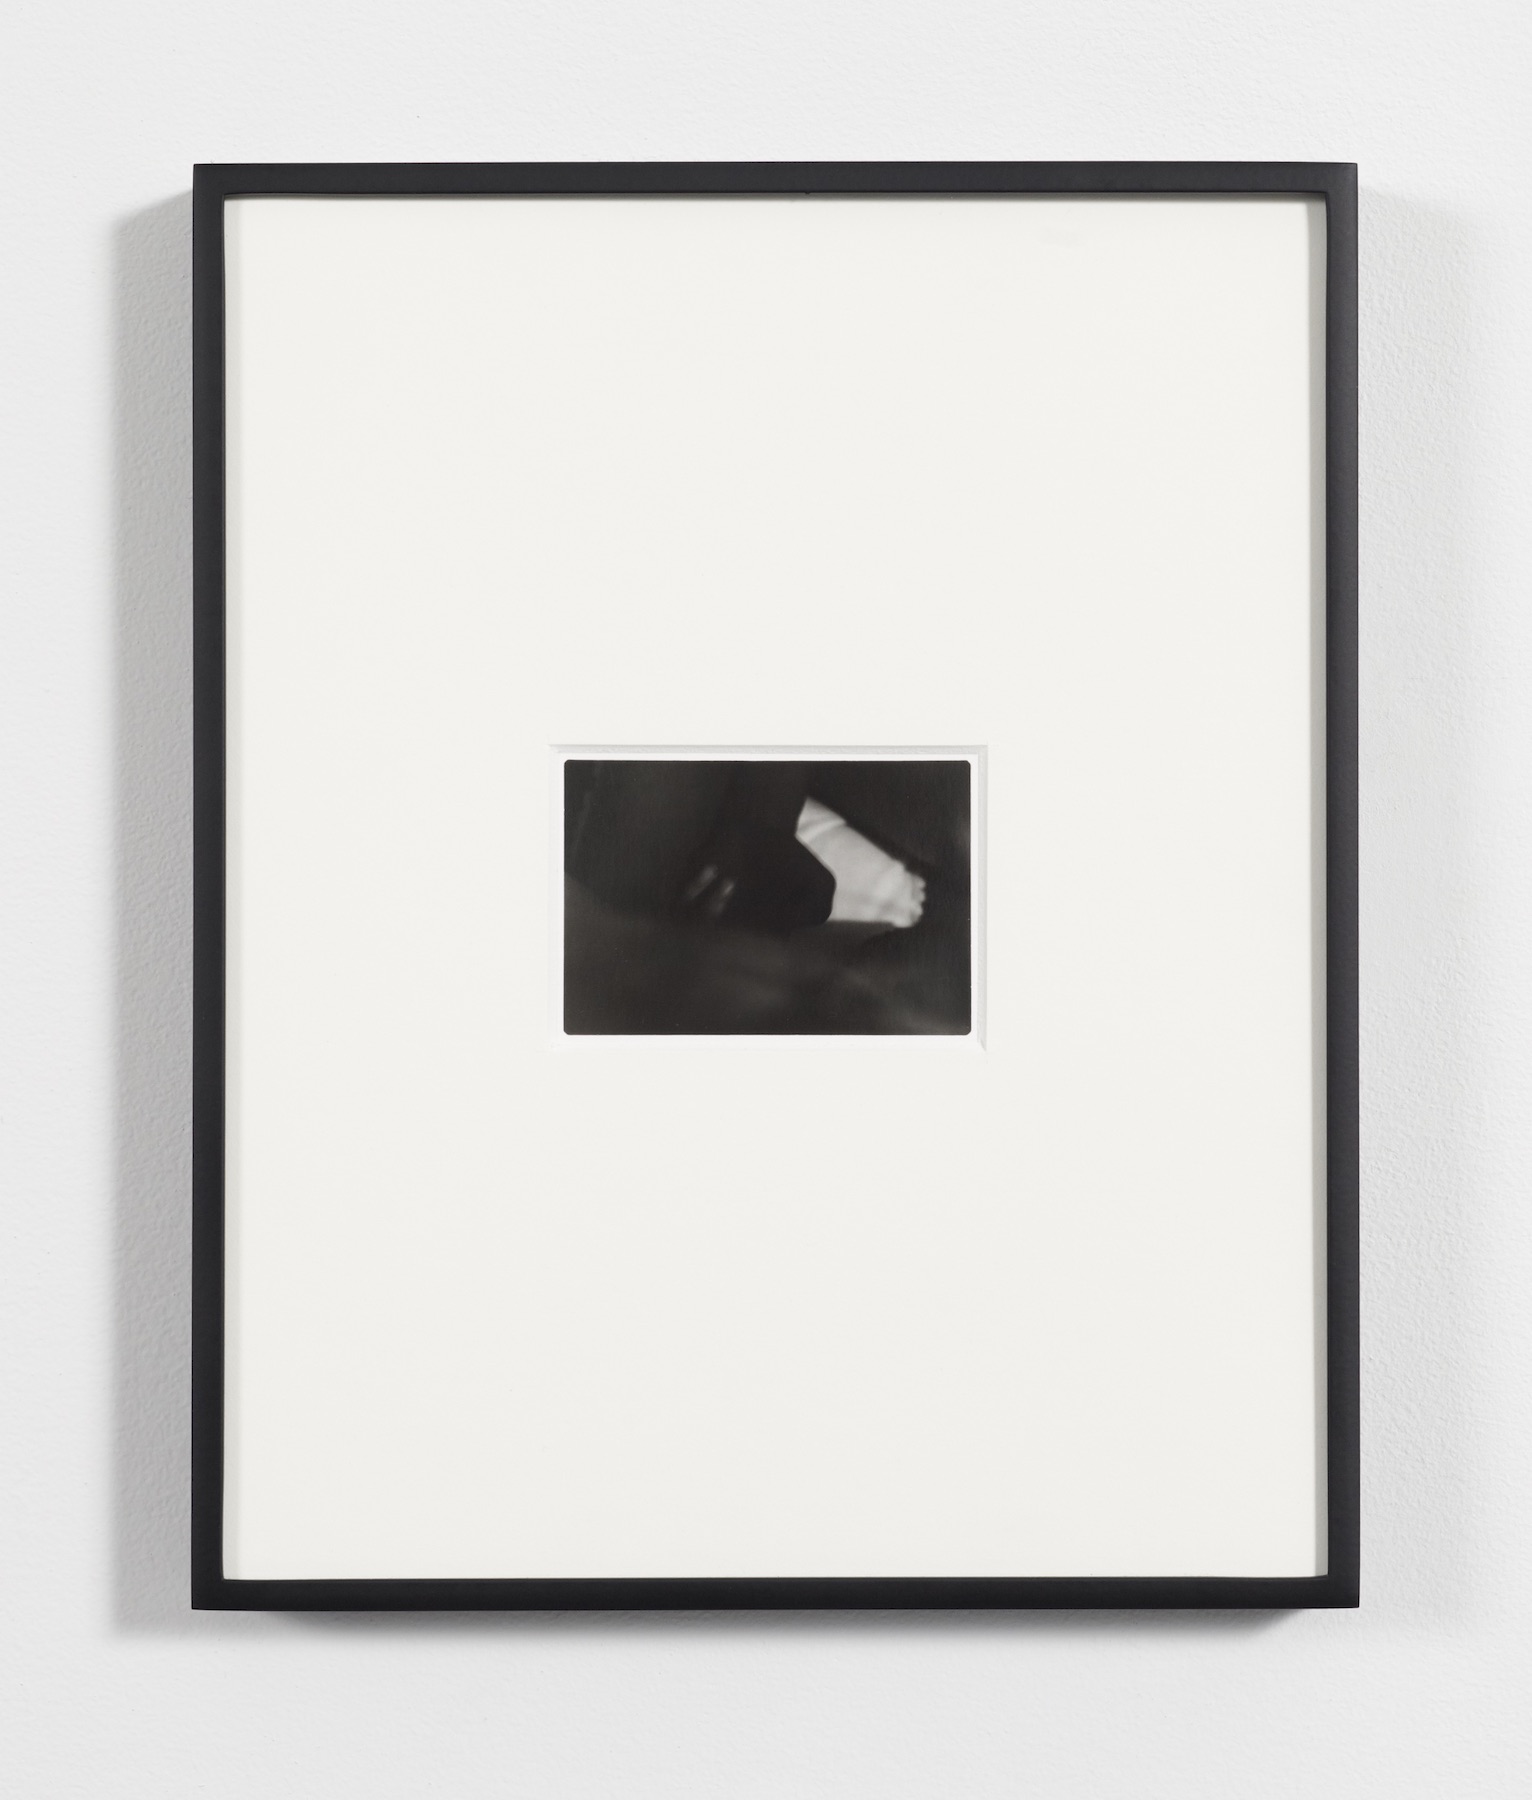 A dark image of indecipherable body parts. Surrounded by a large matte and frame.